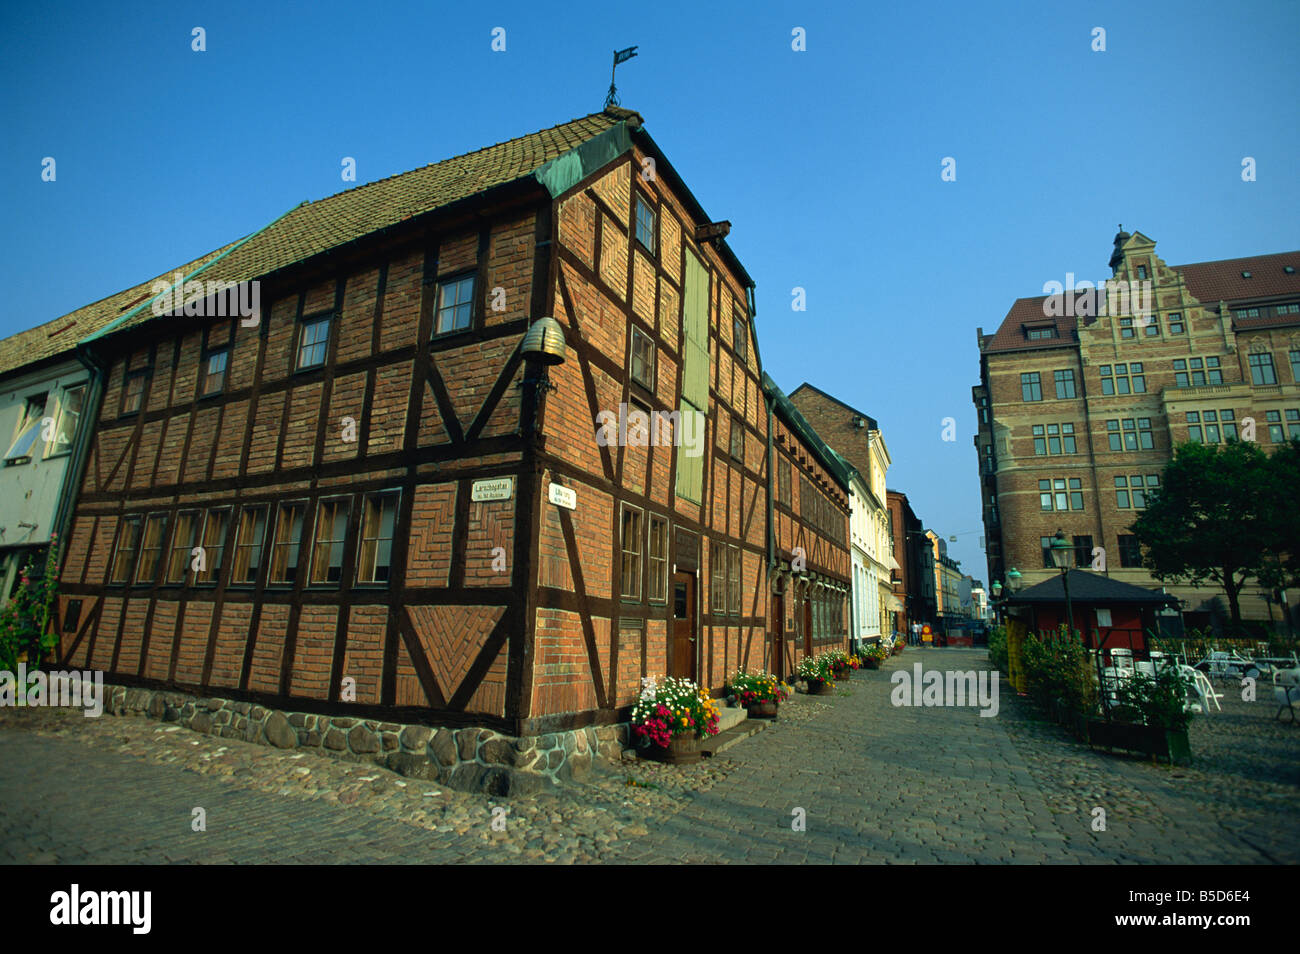 Half-timbered houses in the 16th century Lilla Torget, Malmo, Sweden, Scandinavia, Europe Stock Photo